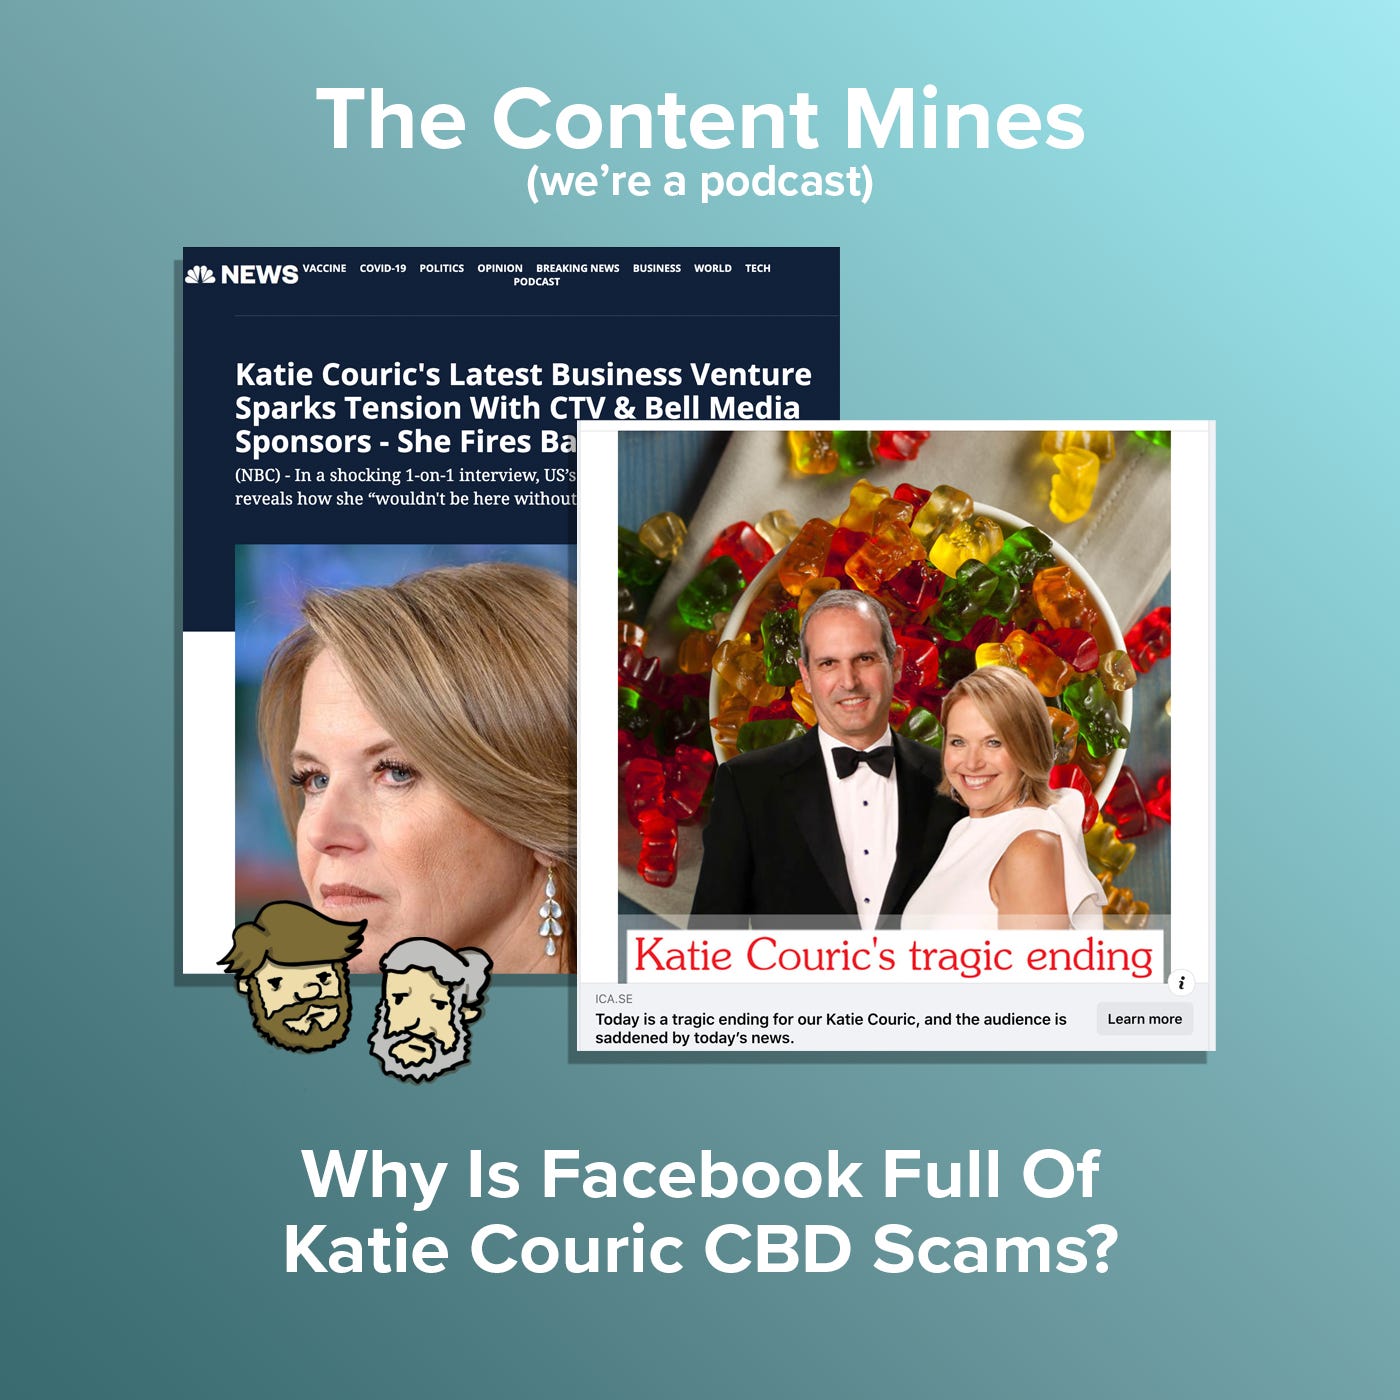 Why Is Facebook Full Of Katie Couric CBD Scams?